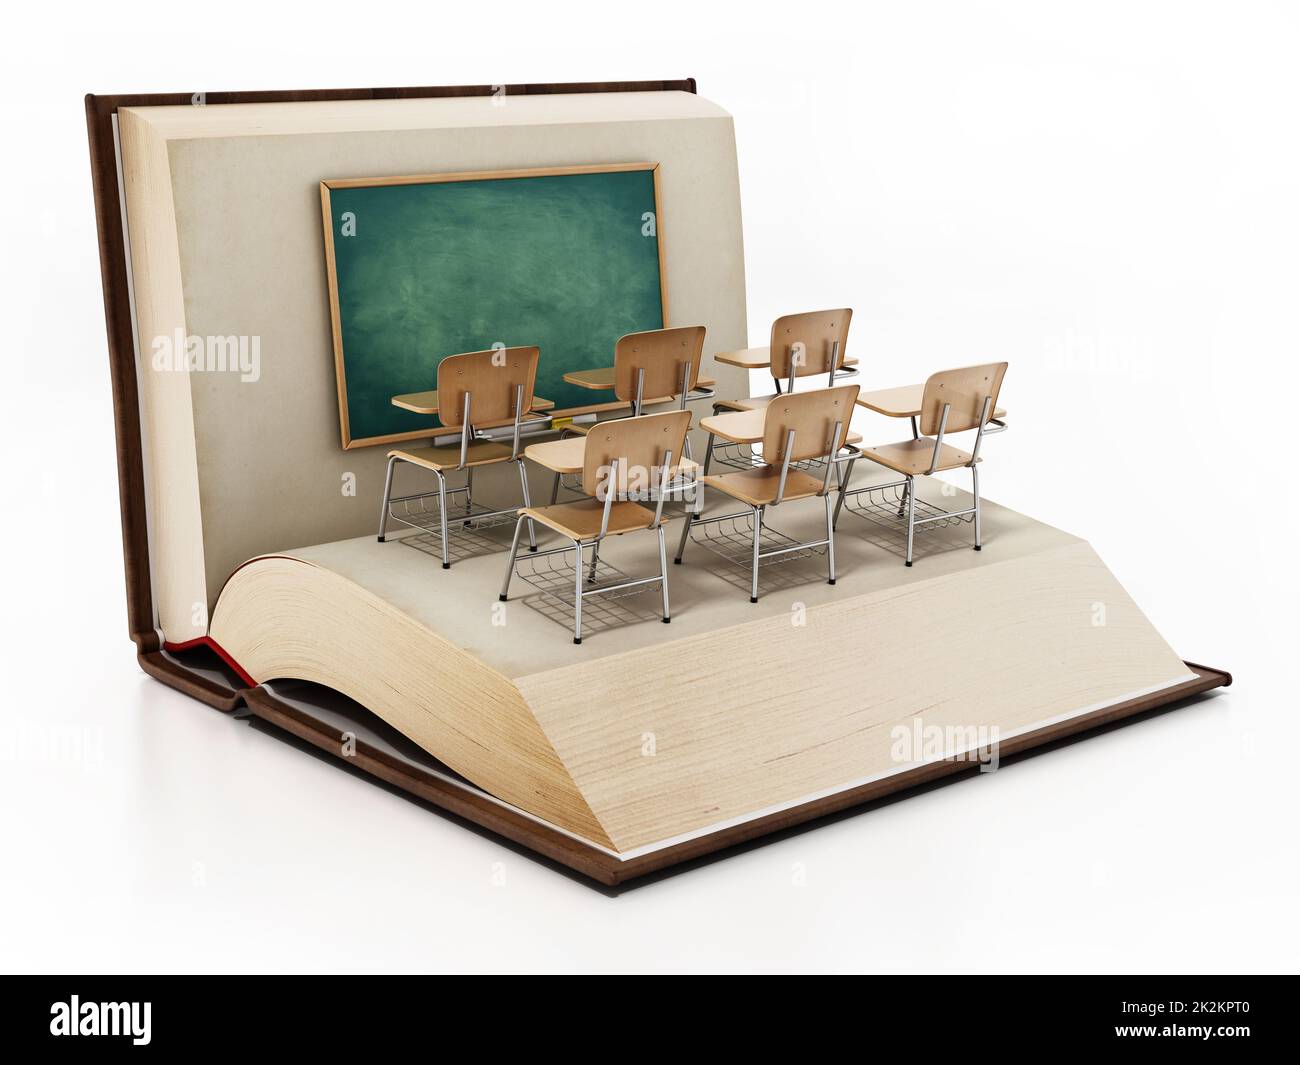 Classroom seats and blackboard standing on open book pages. Education concept. 3D illustration Stock Photo